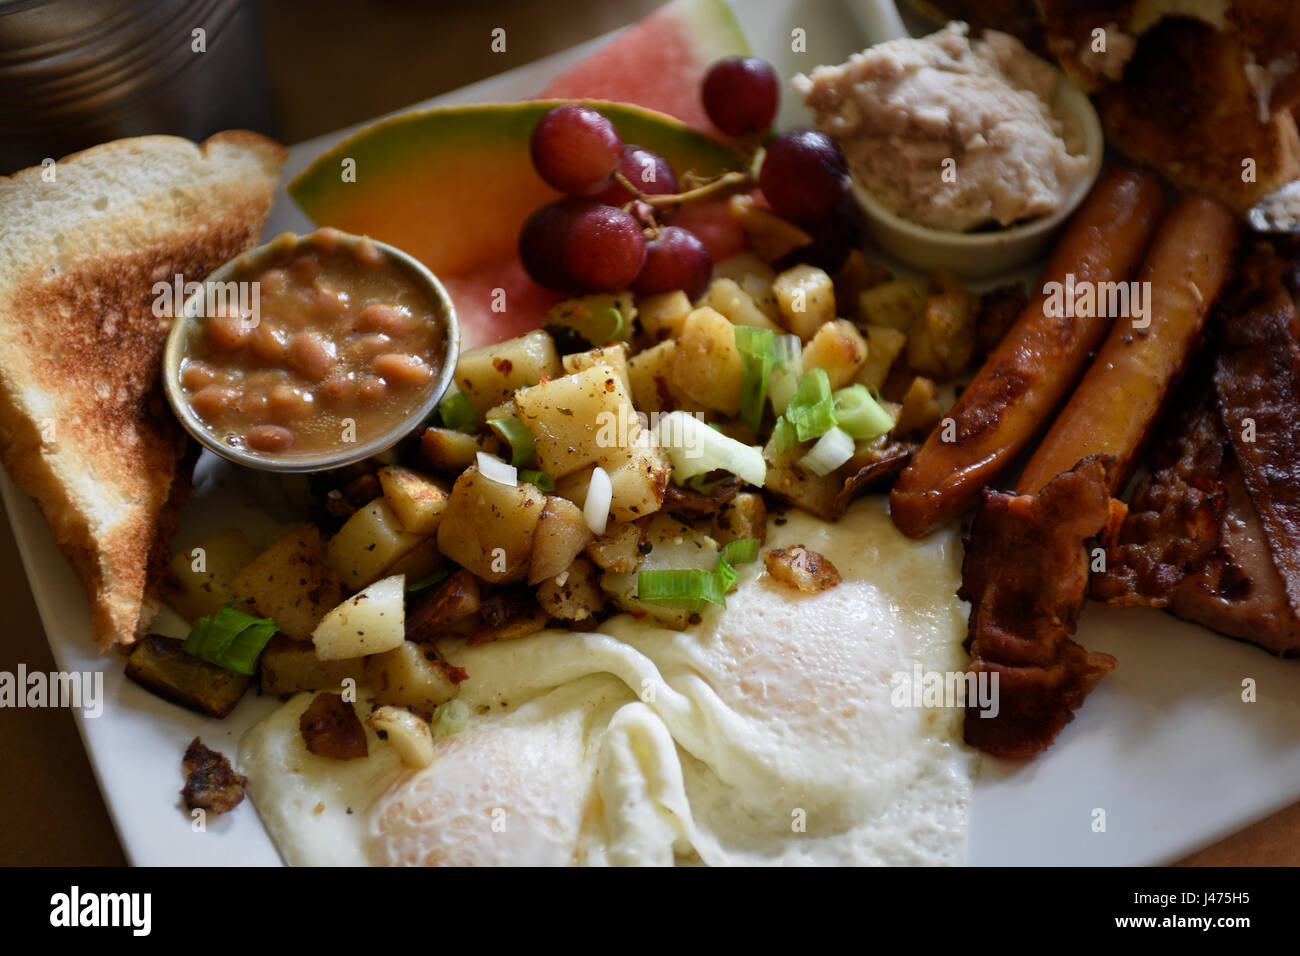 Full breakfast with french toast, fried potatos, sausages, bacon, eggs, greaves, beans an fruits Stock Photo